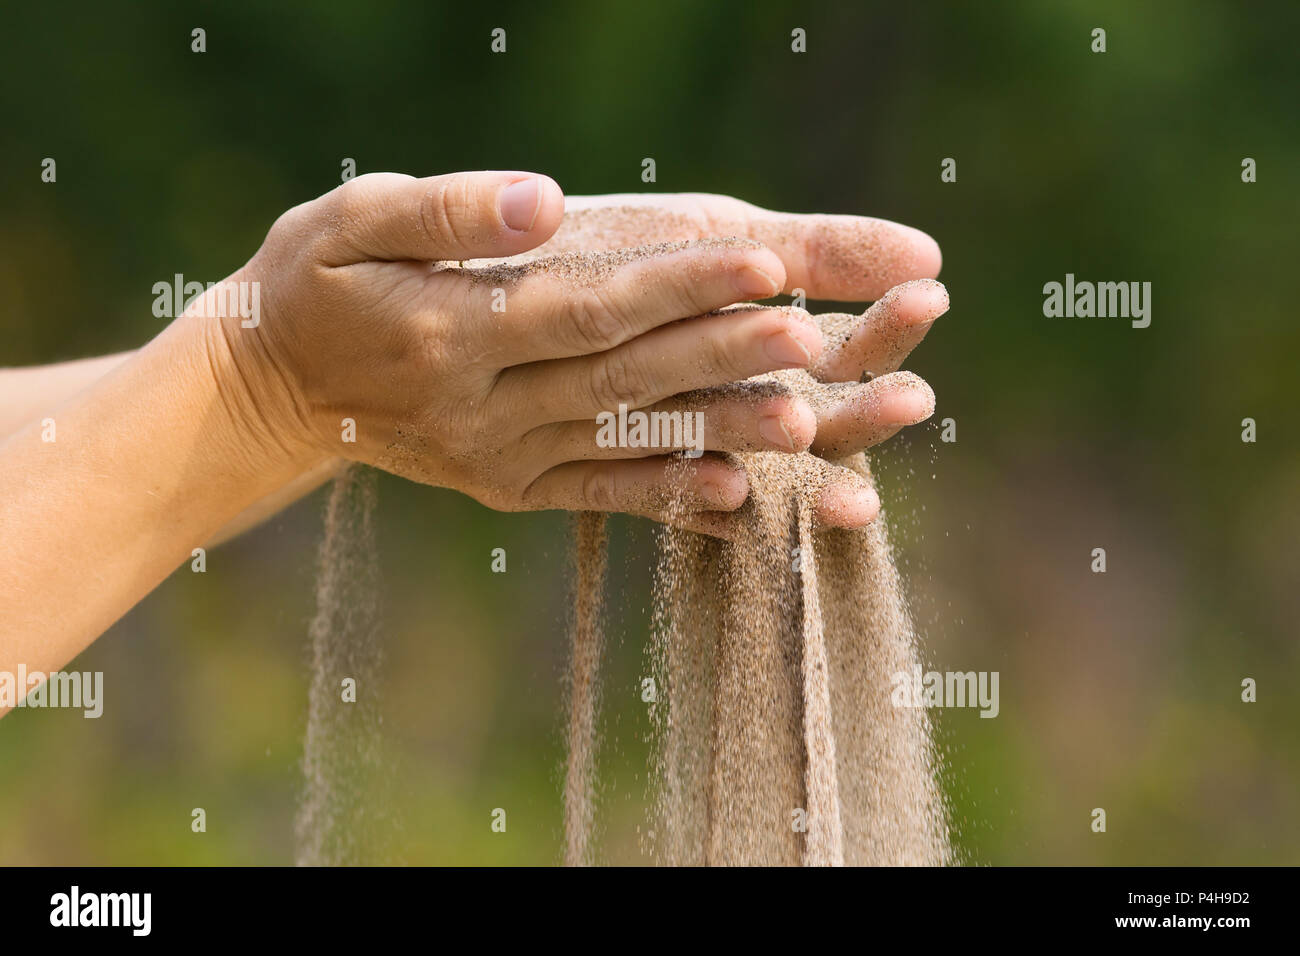 sand running through hands like time running out Stock Photo